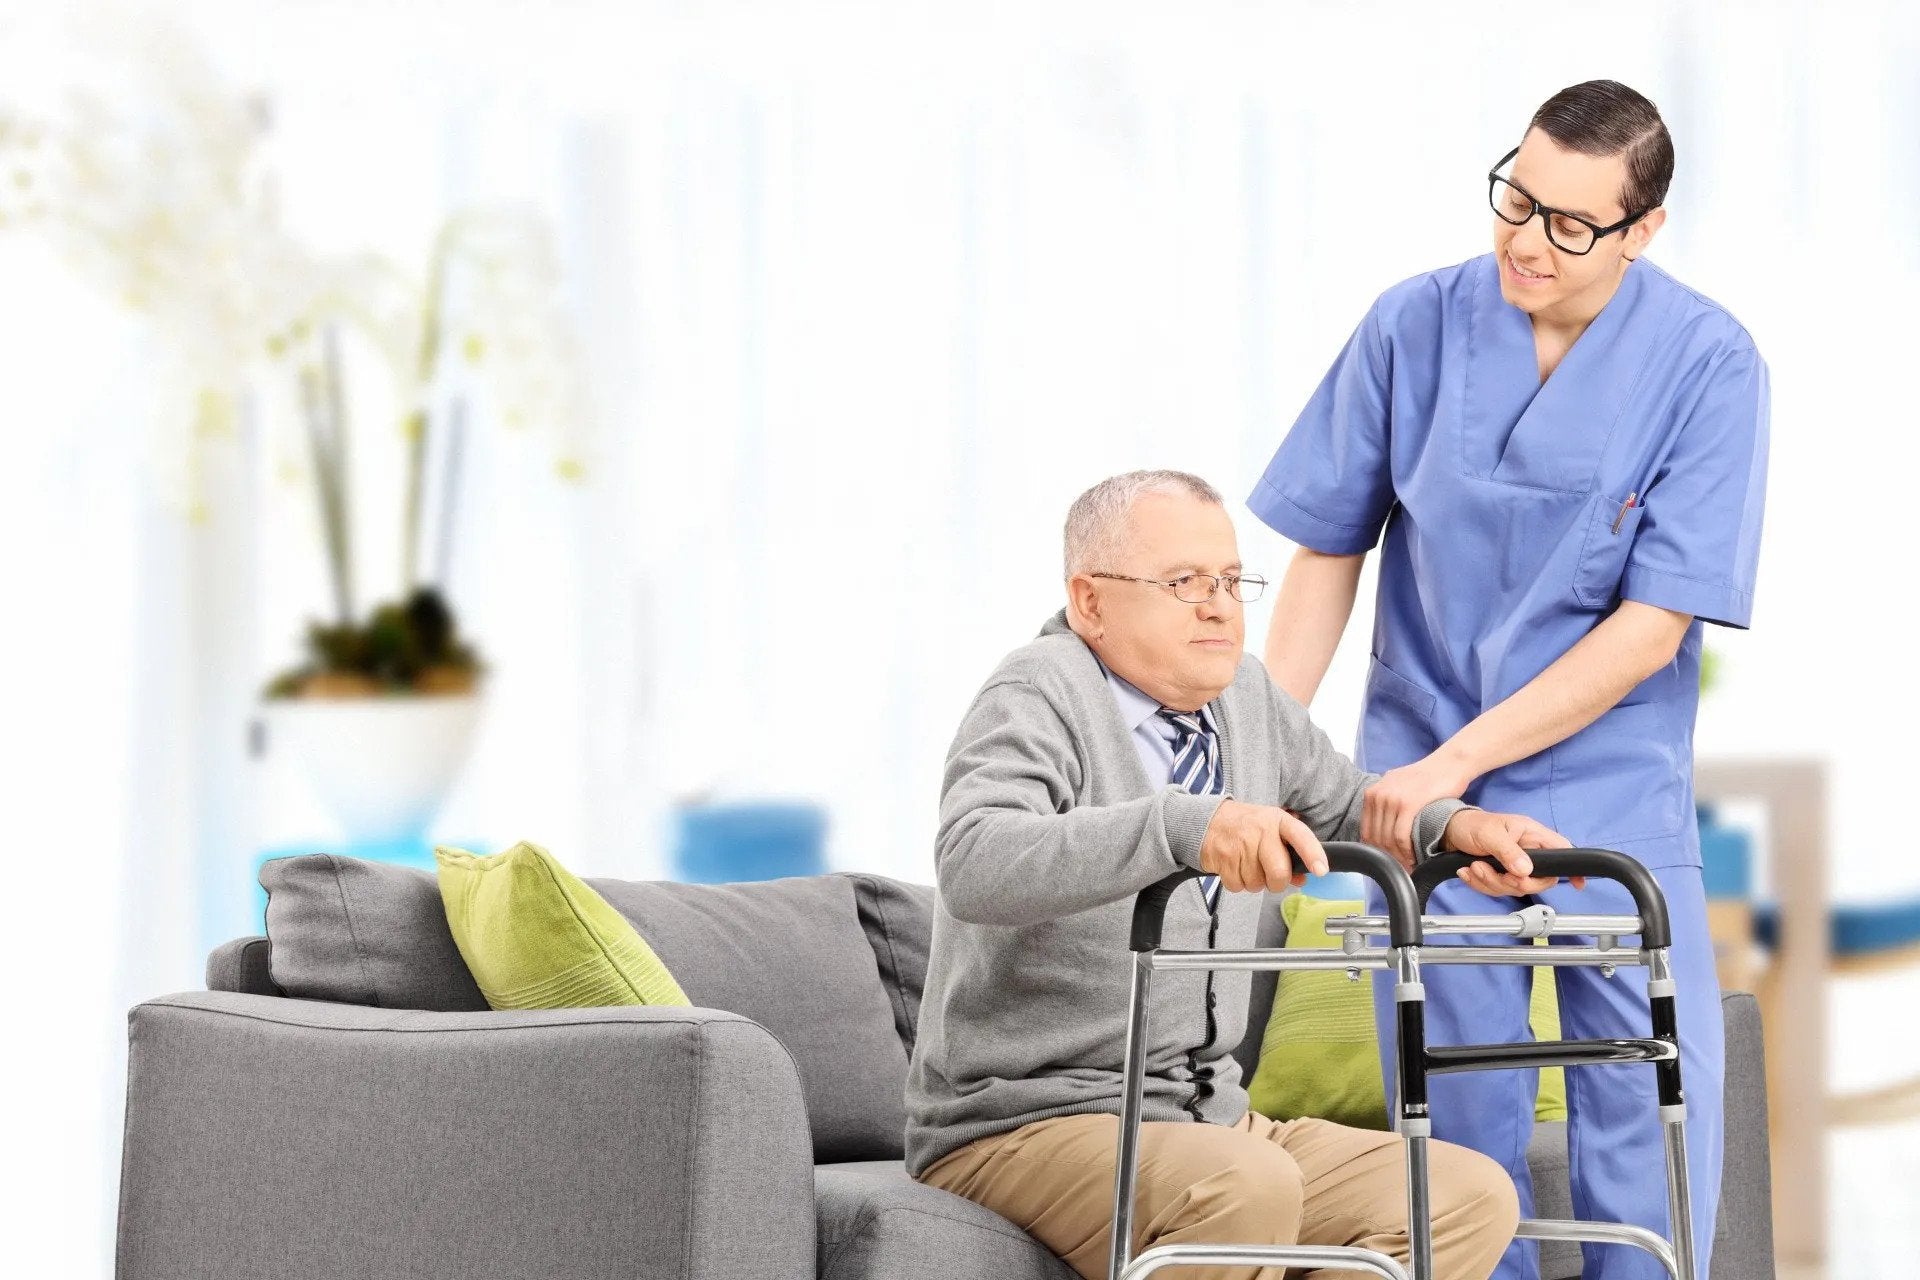 3 Pieces of Home Medical Equipment That Can Offer You Comfort and Safety